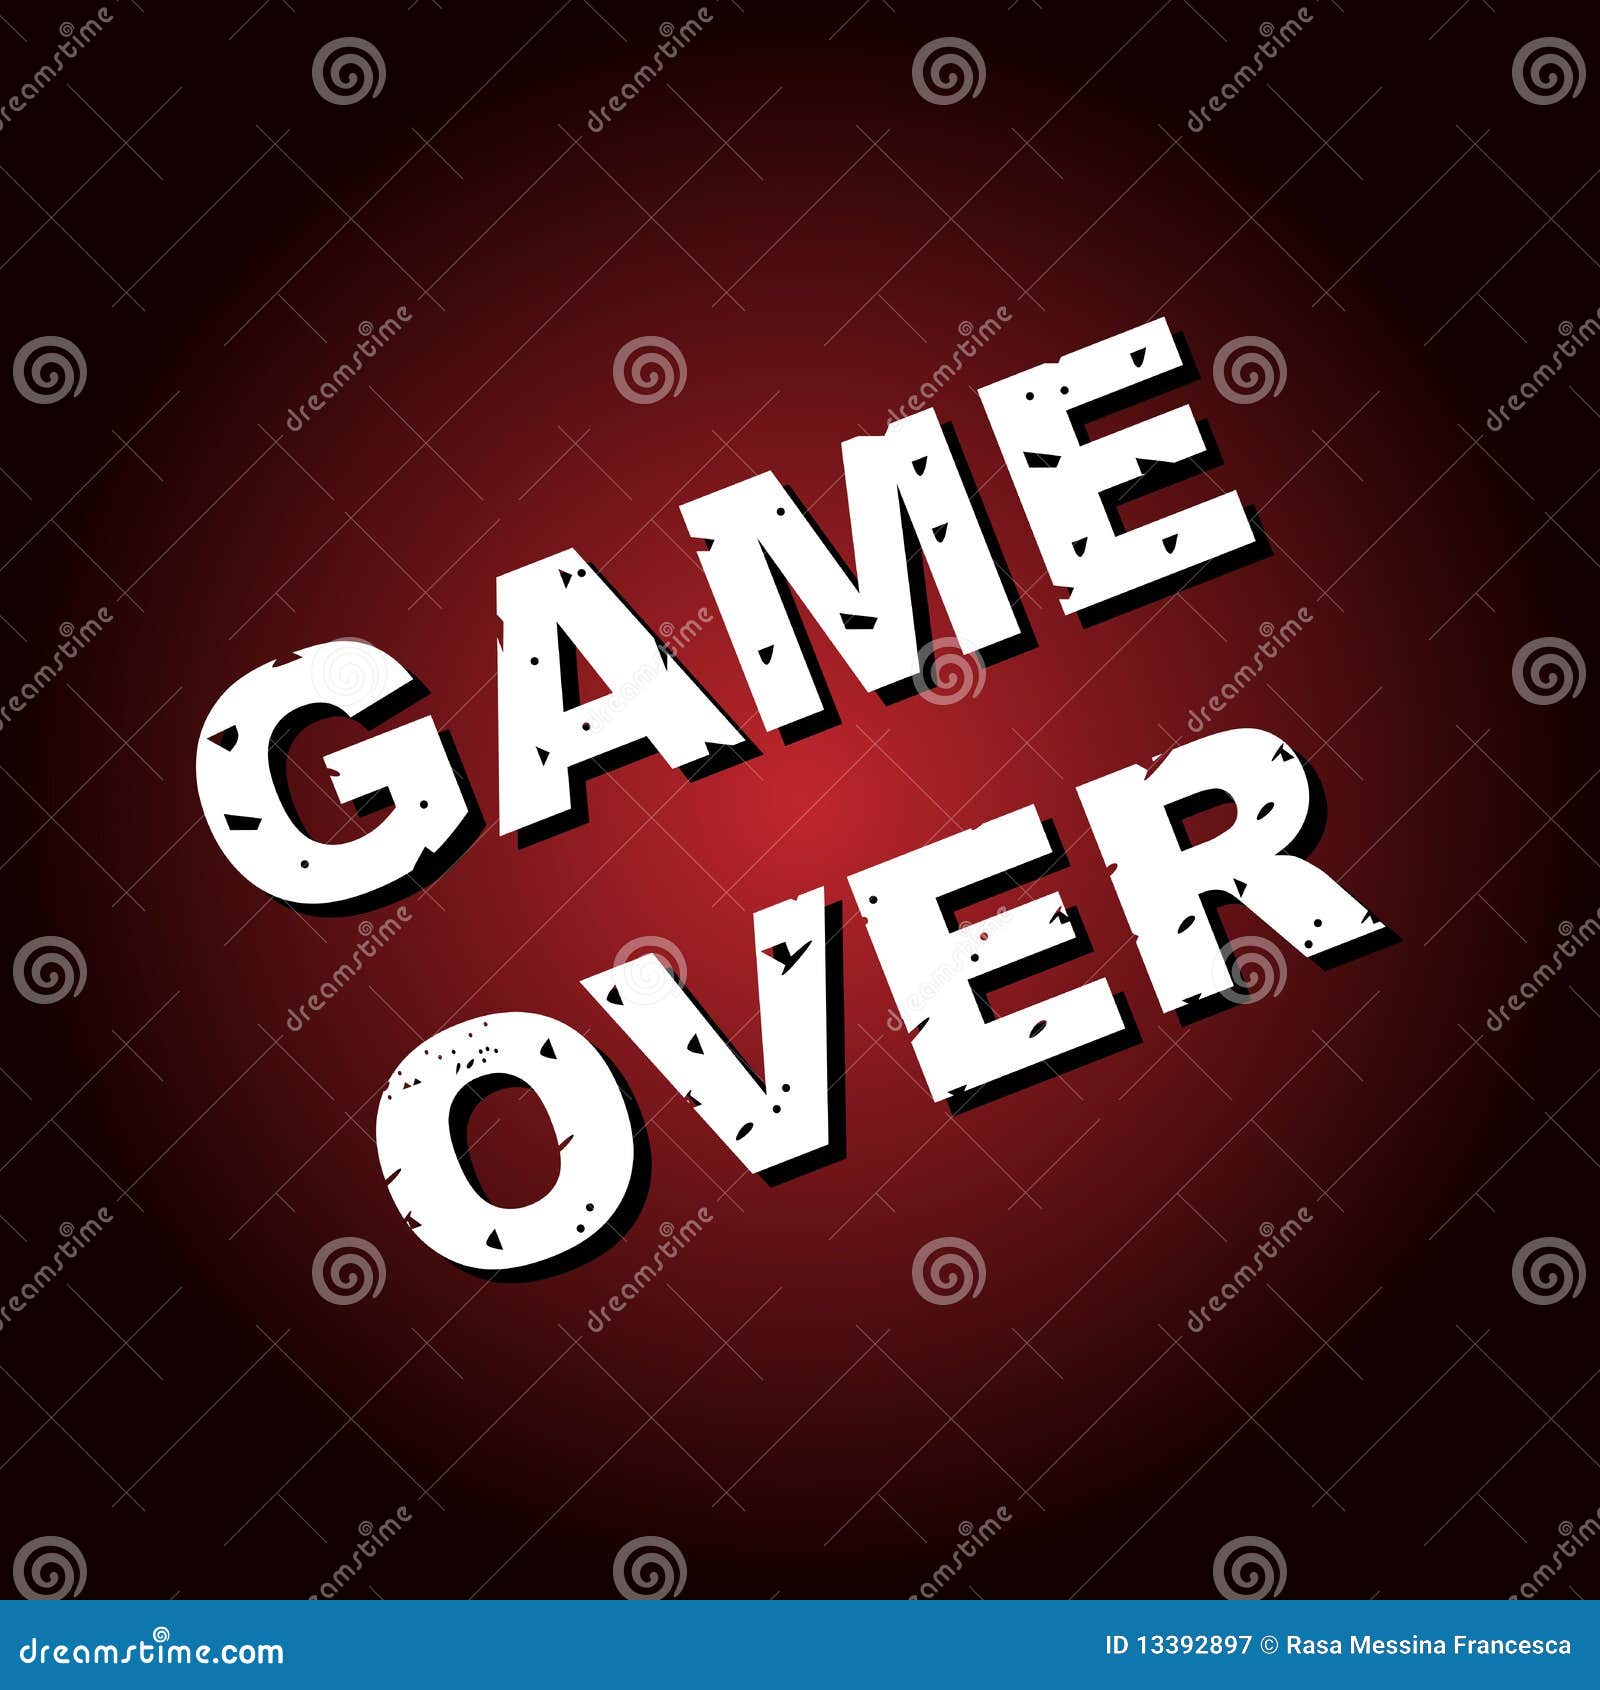 Game over background stock vector. Illustration of graphics - 13392897